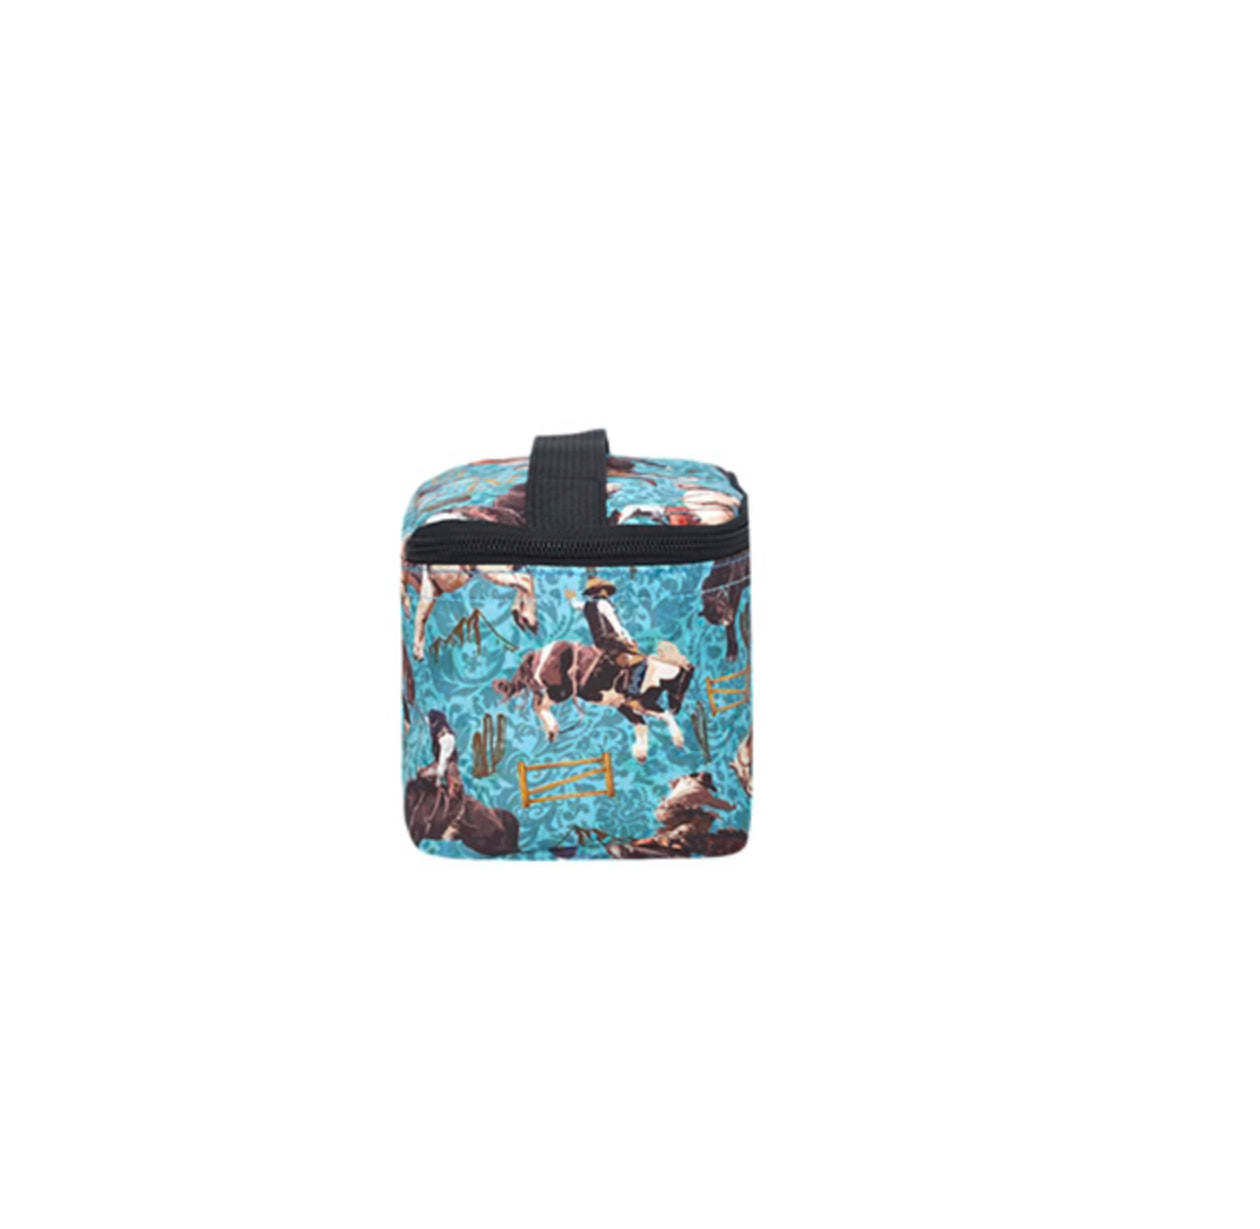 Giddy Up Cosmetic Case